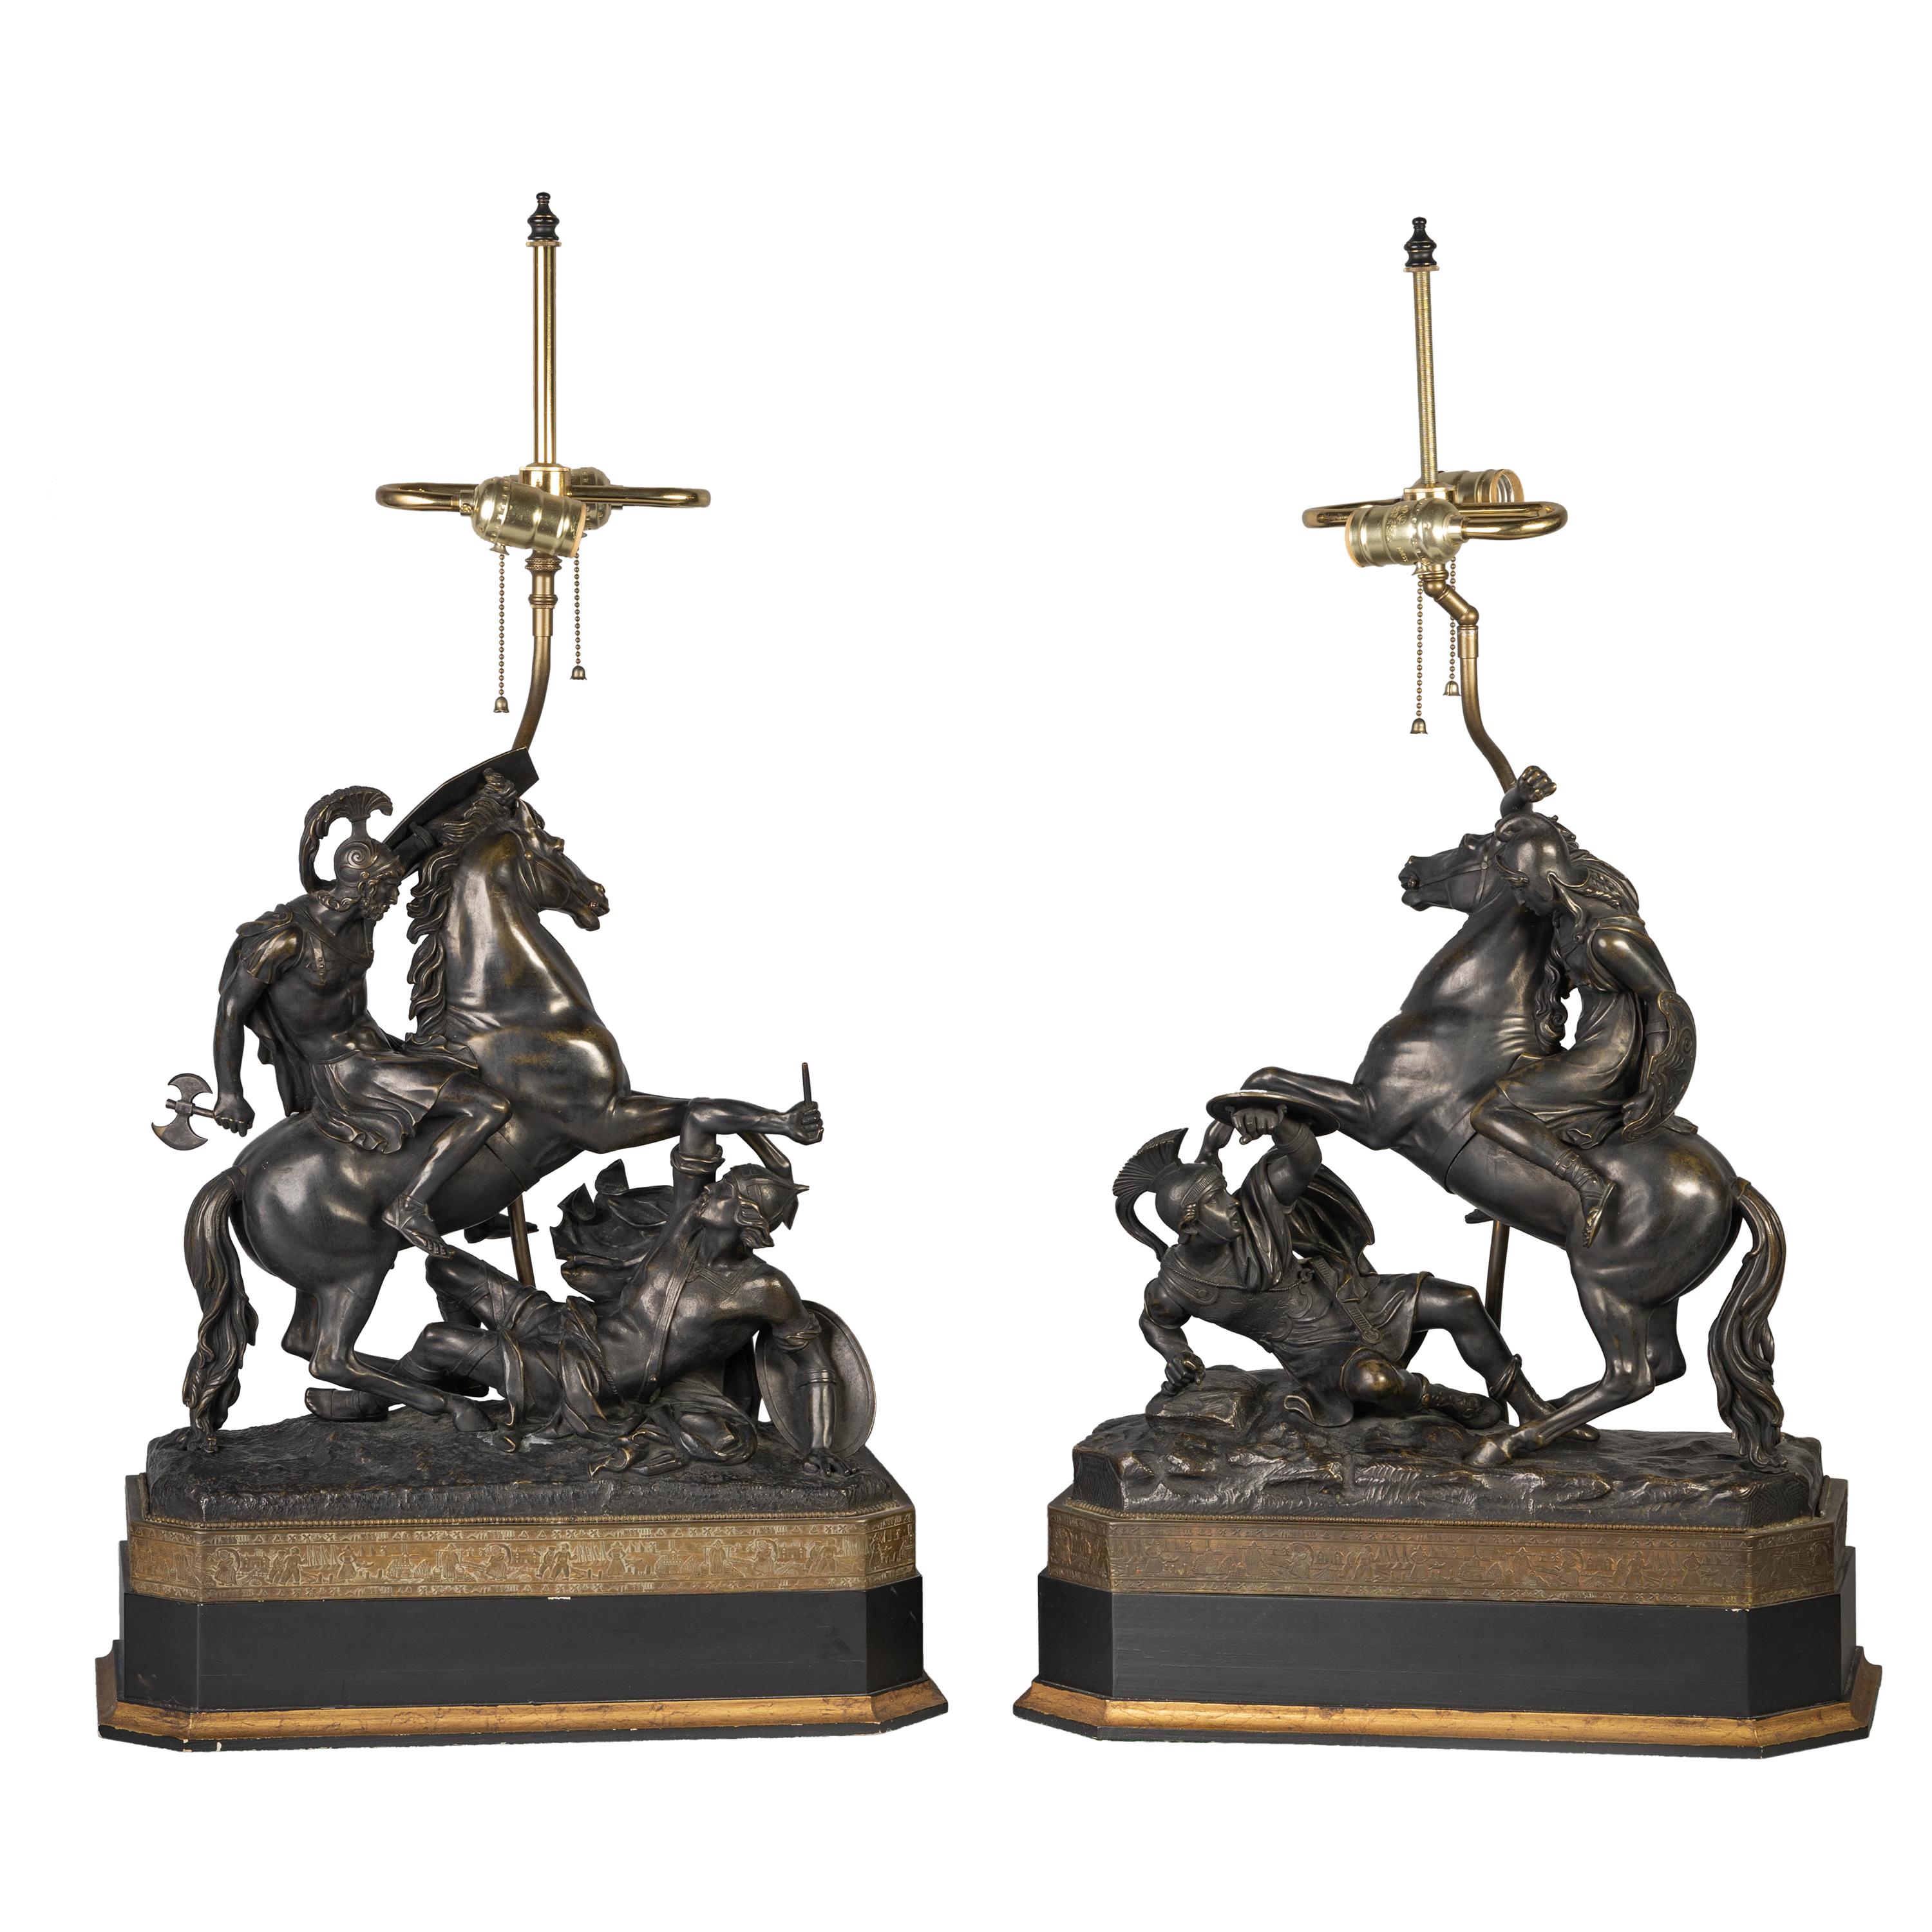 Pair of French Patinated Bronze Roman Equestrian Warrior Groups, 19th Century